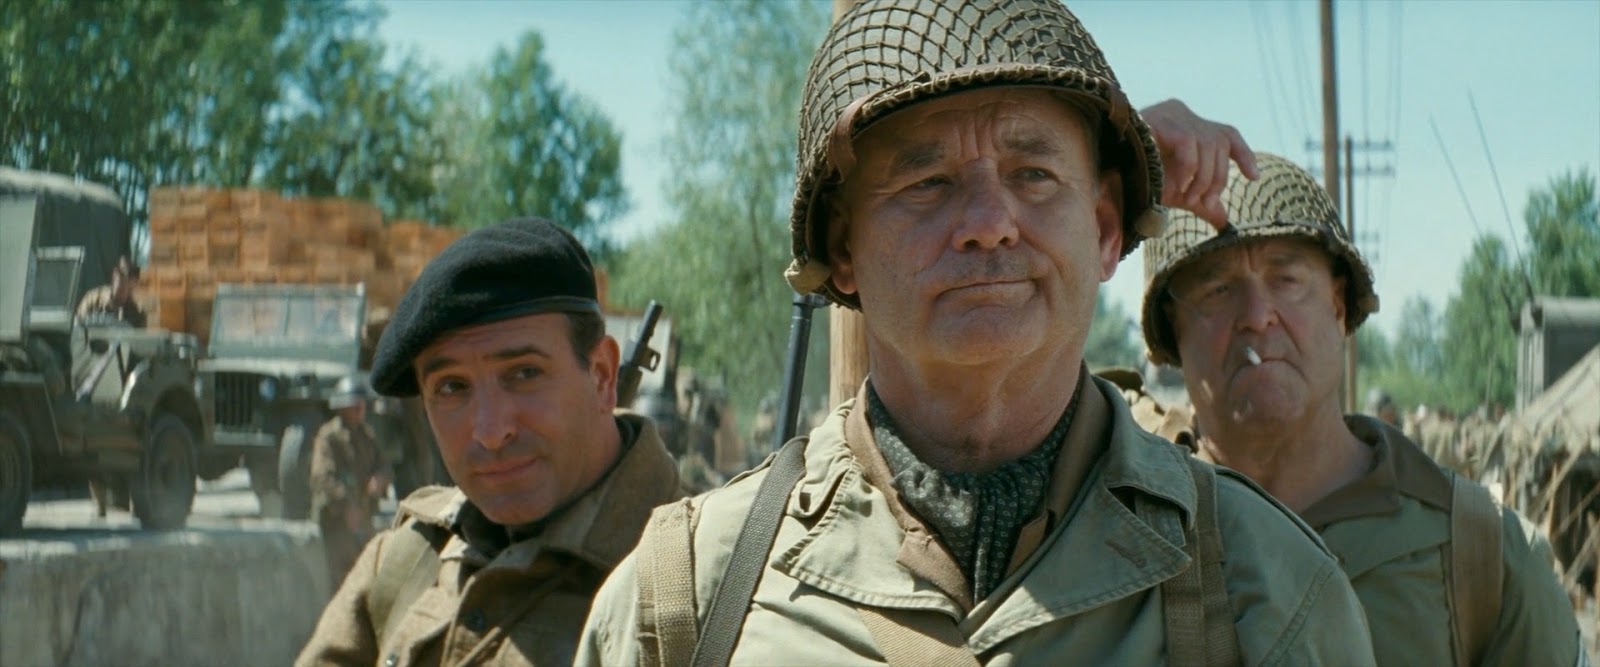 The Monuments Men (2014) Watch Online 1080p BluRay -1